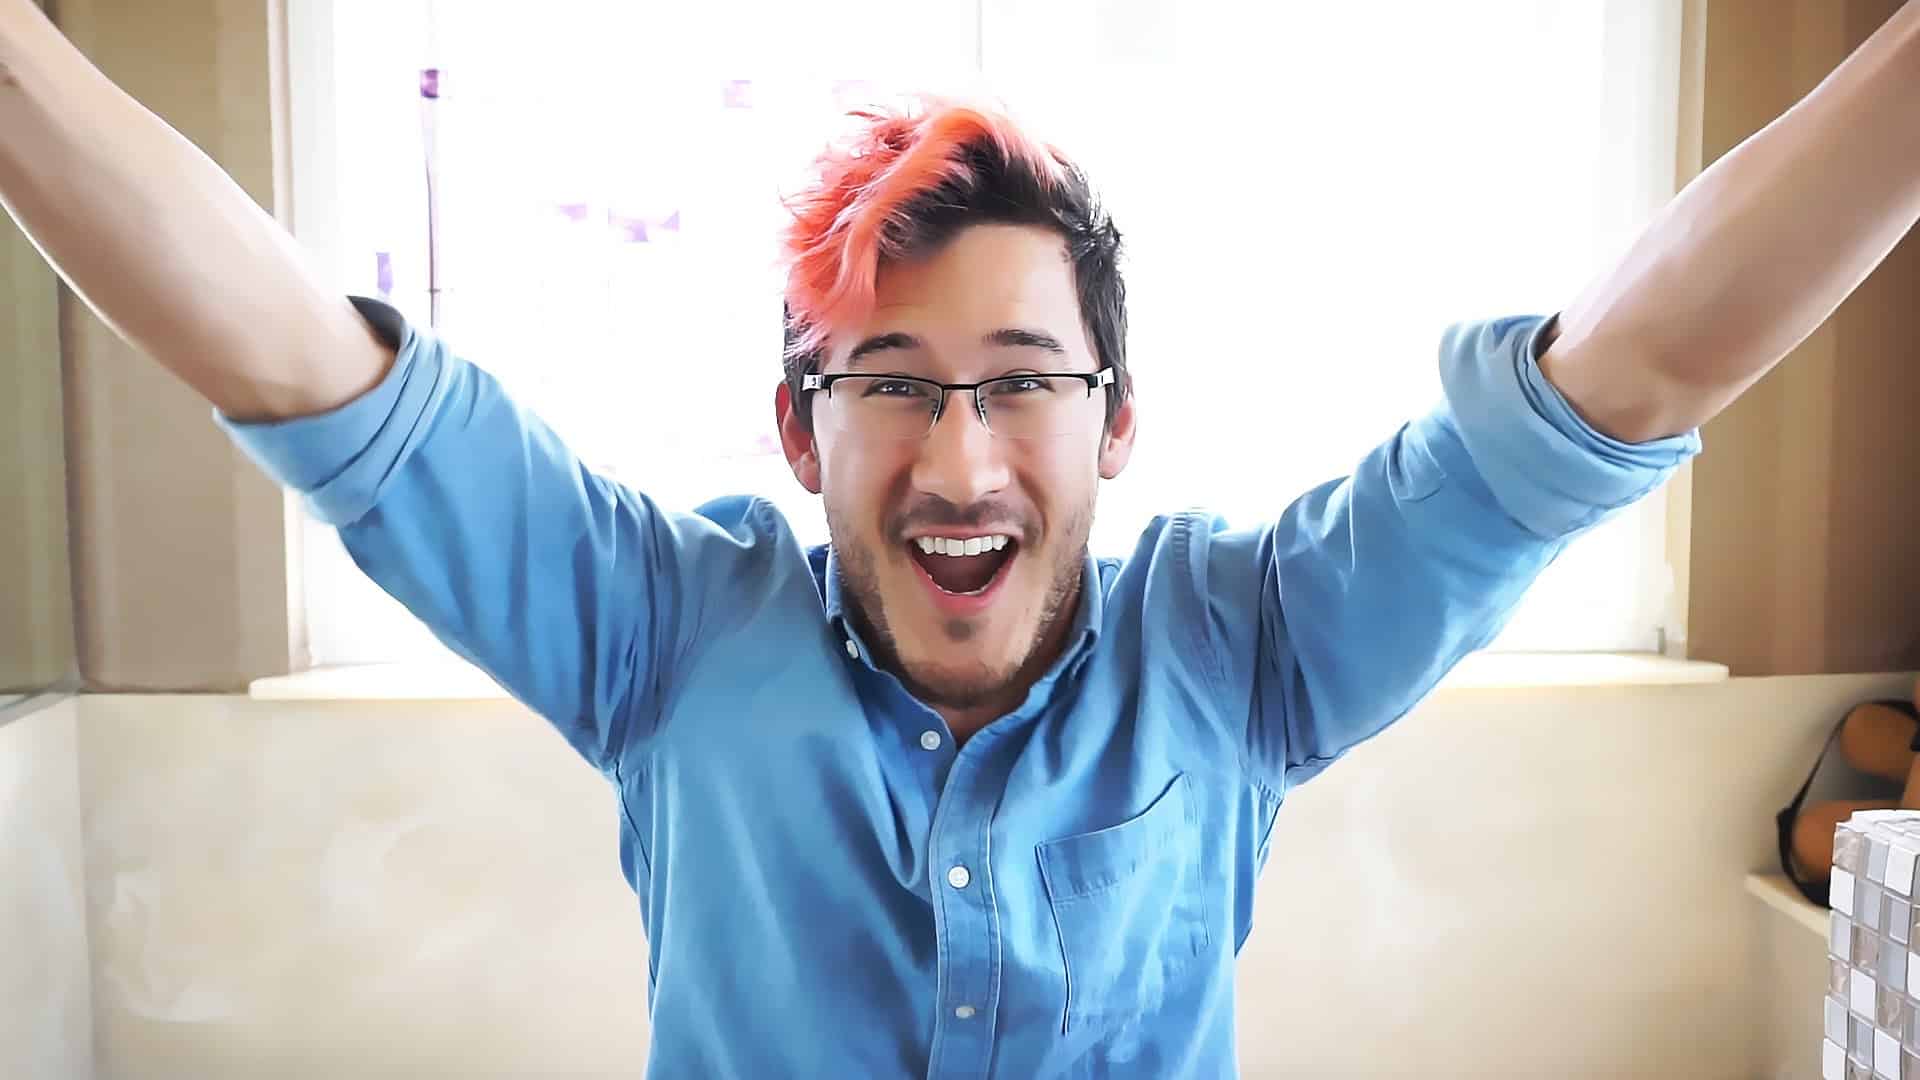 What webcam does markiplier use